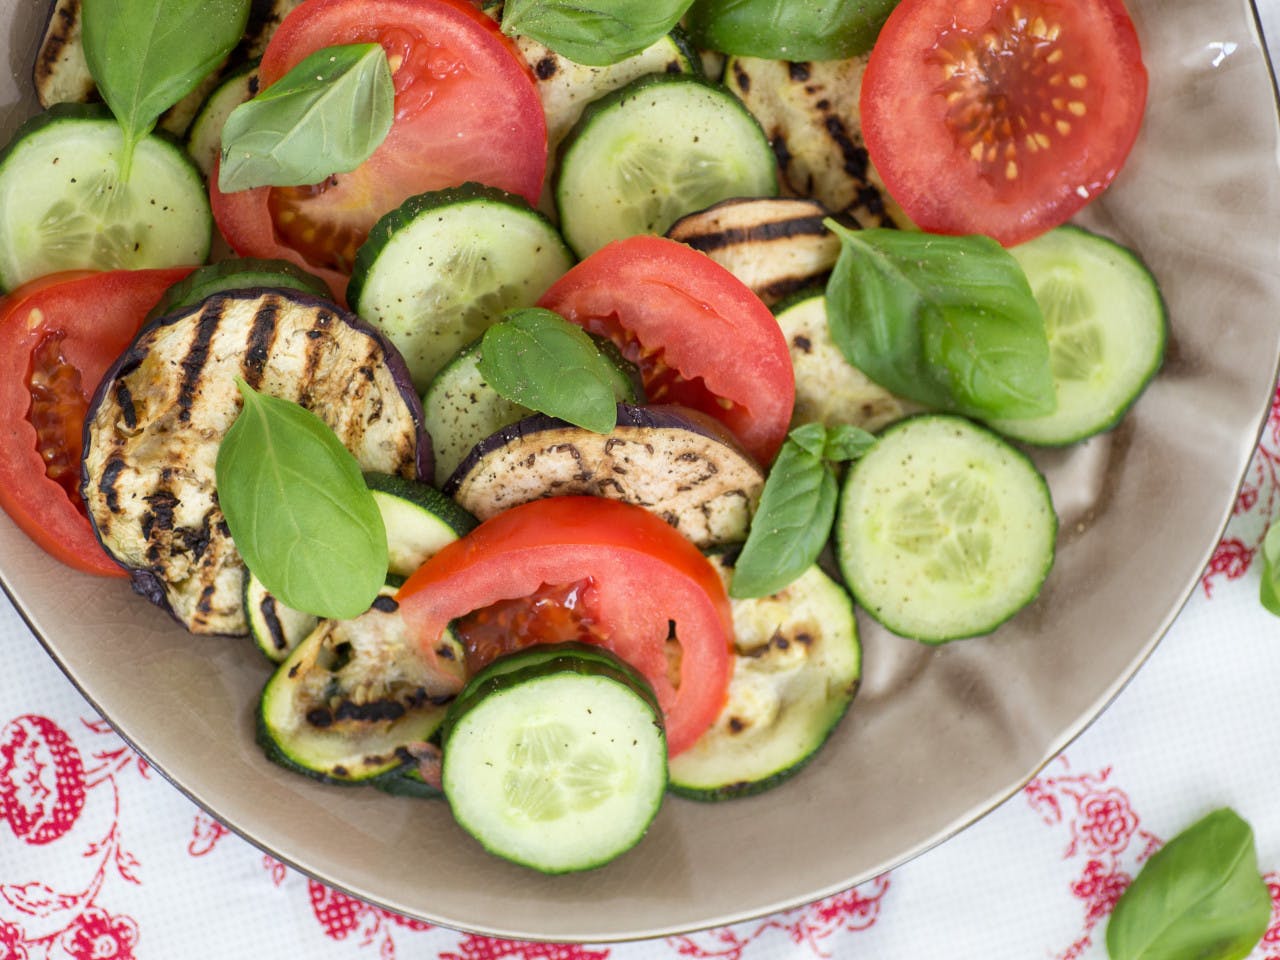 Grilled vegetables and tomatoes